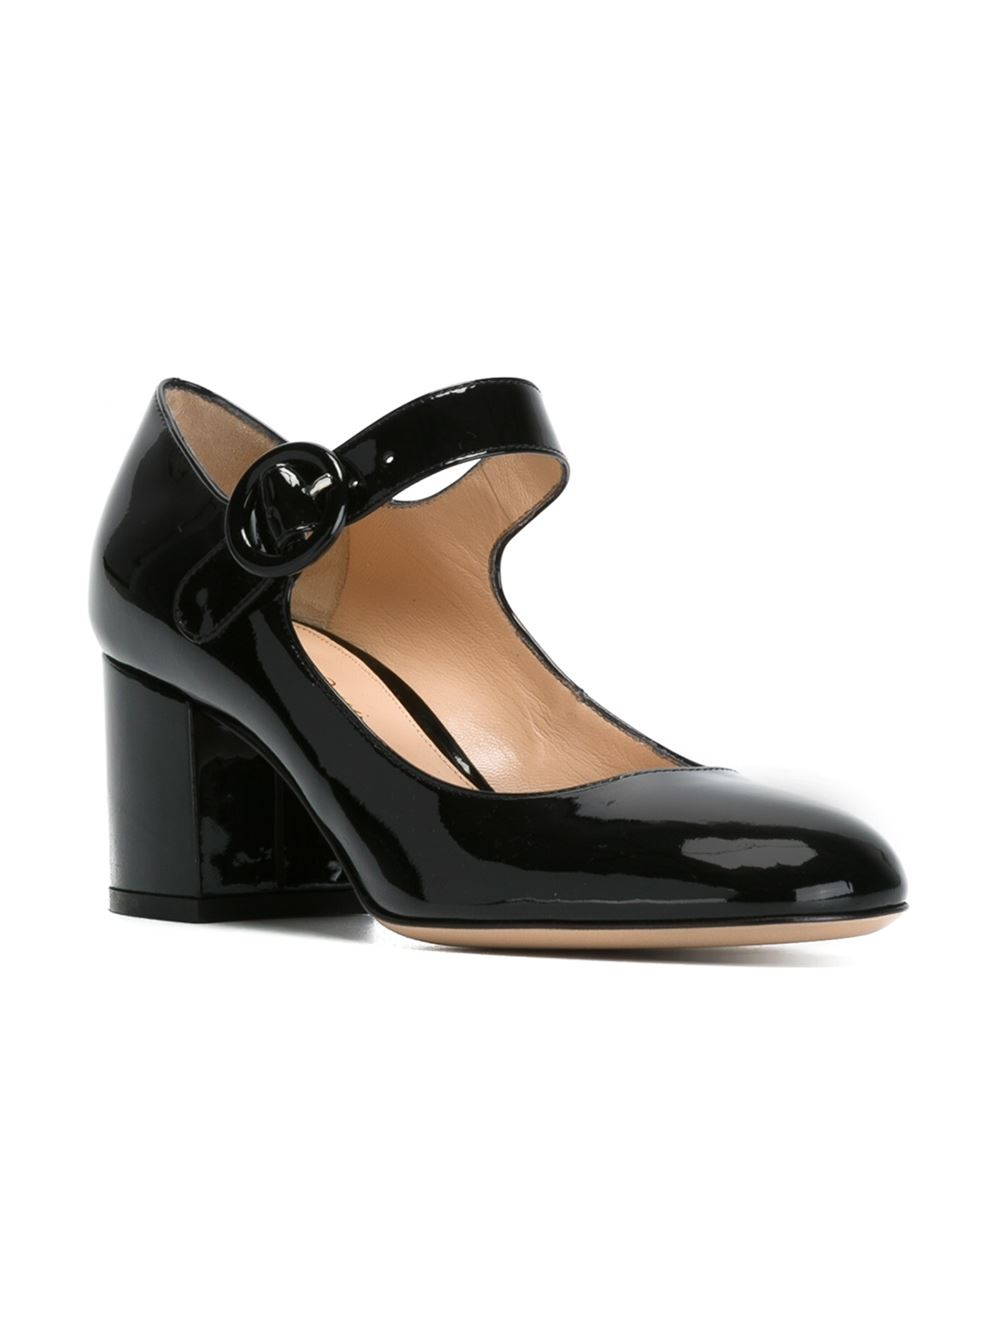 Gianvito rossi Patent-Leather Mary Jane Pumps in Black | Lyst